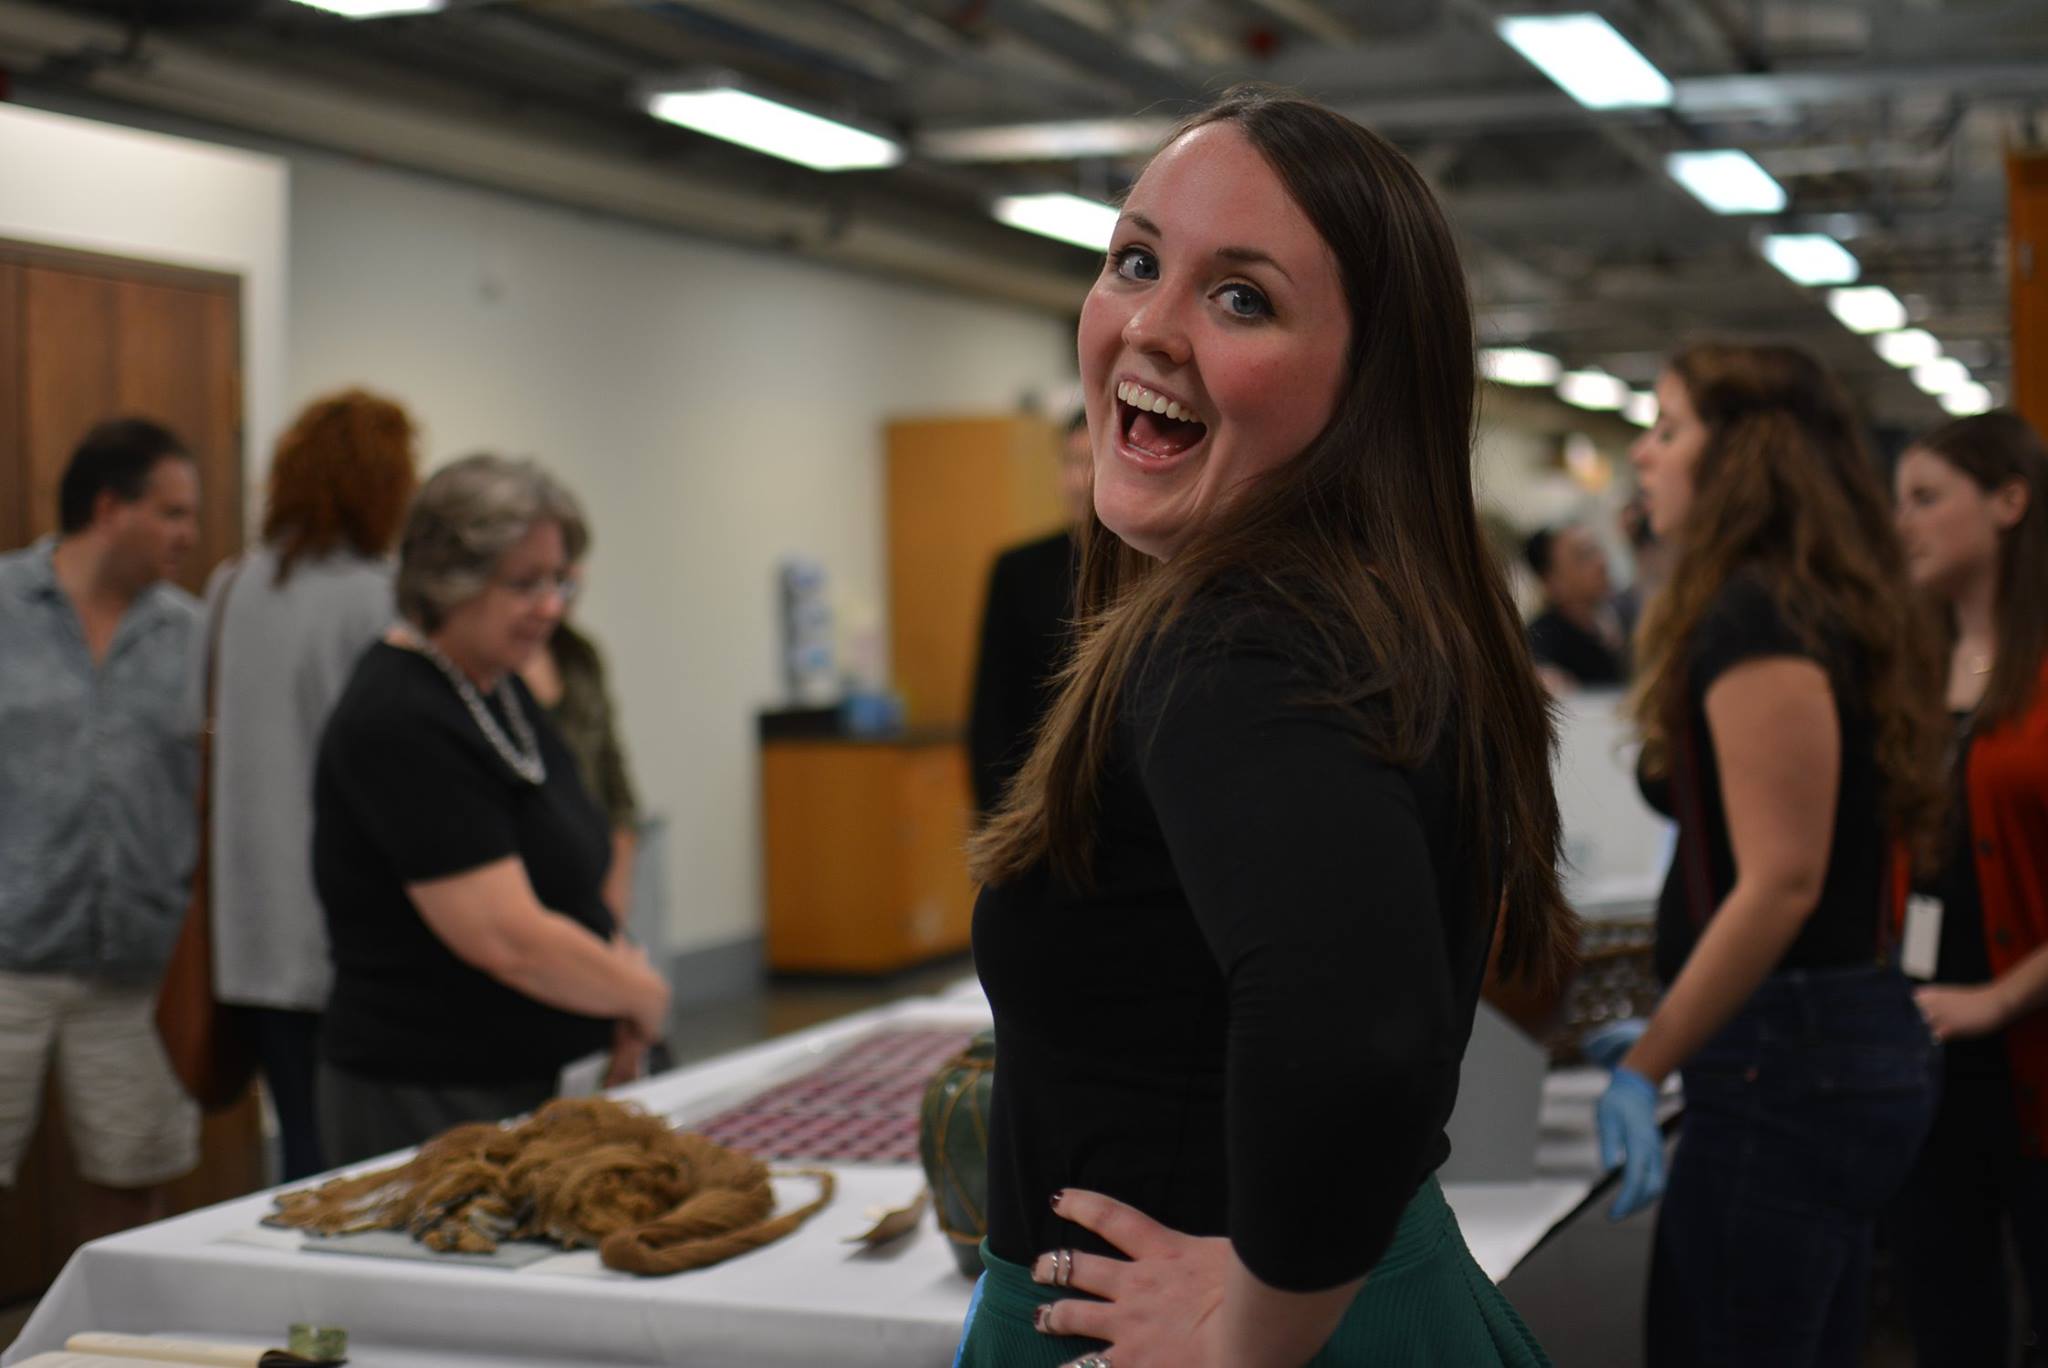 Liz grins excitedly as guests begin entering room 3805 to learn about the Anthropology collections at The Field. (c) Field Museum of Natural History - CC BY-NC 4.0